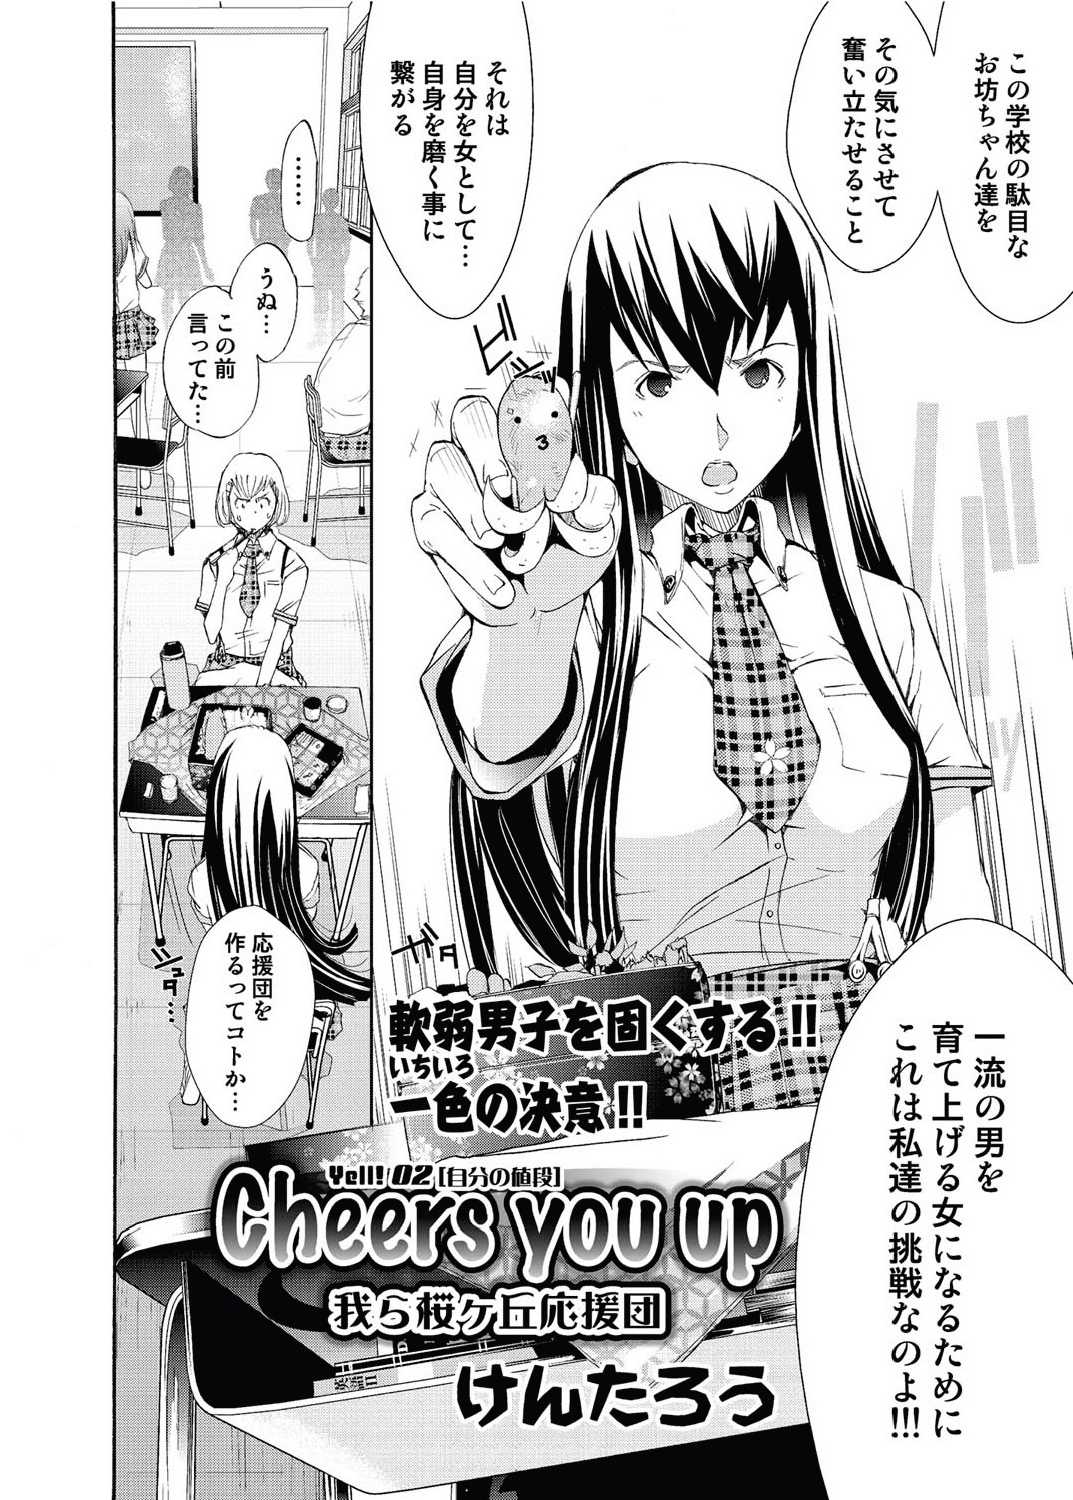 [Kentarou] Cheers you up (Complete) [けんたろう] Cheers you up 全10話